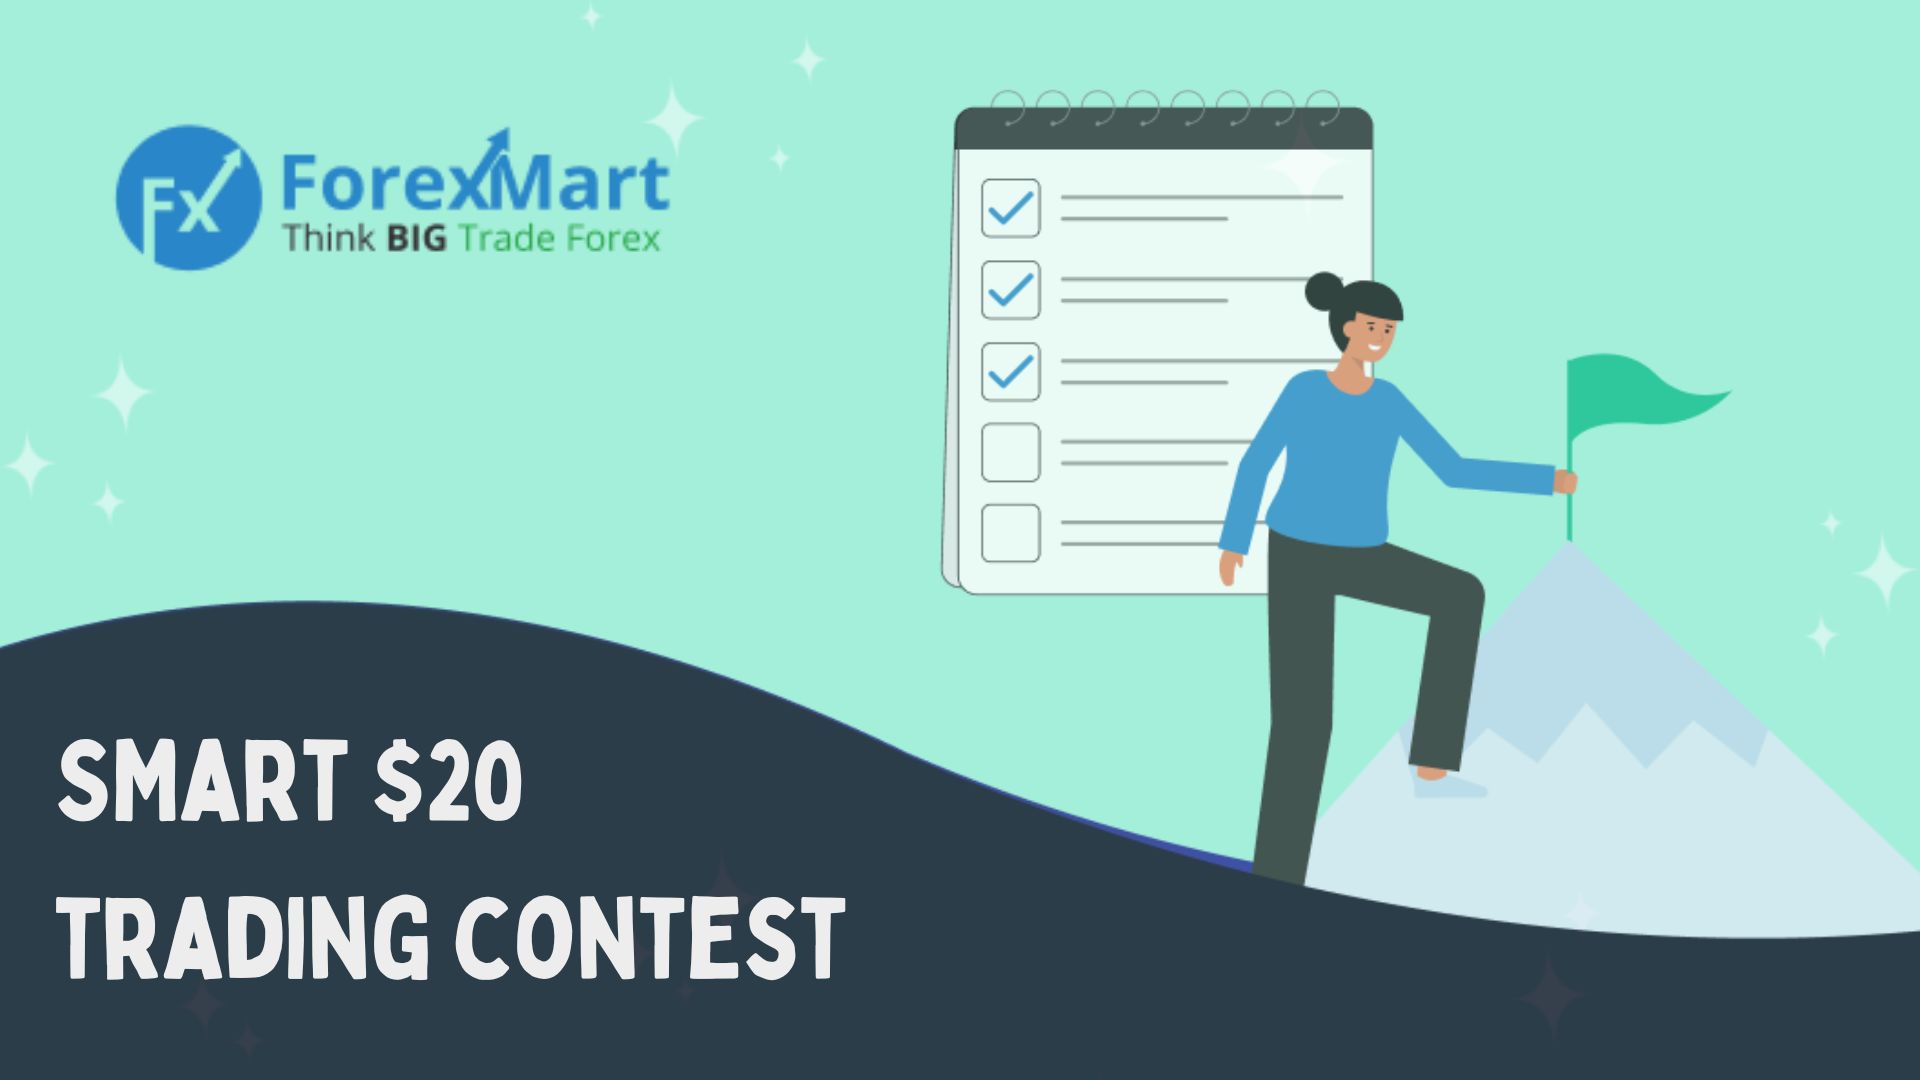 SMart  Trading Contest – ForexMart